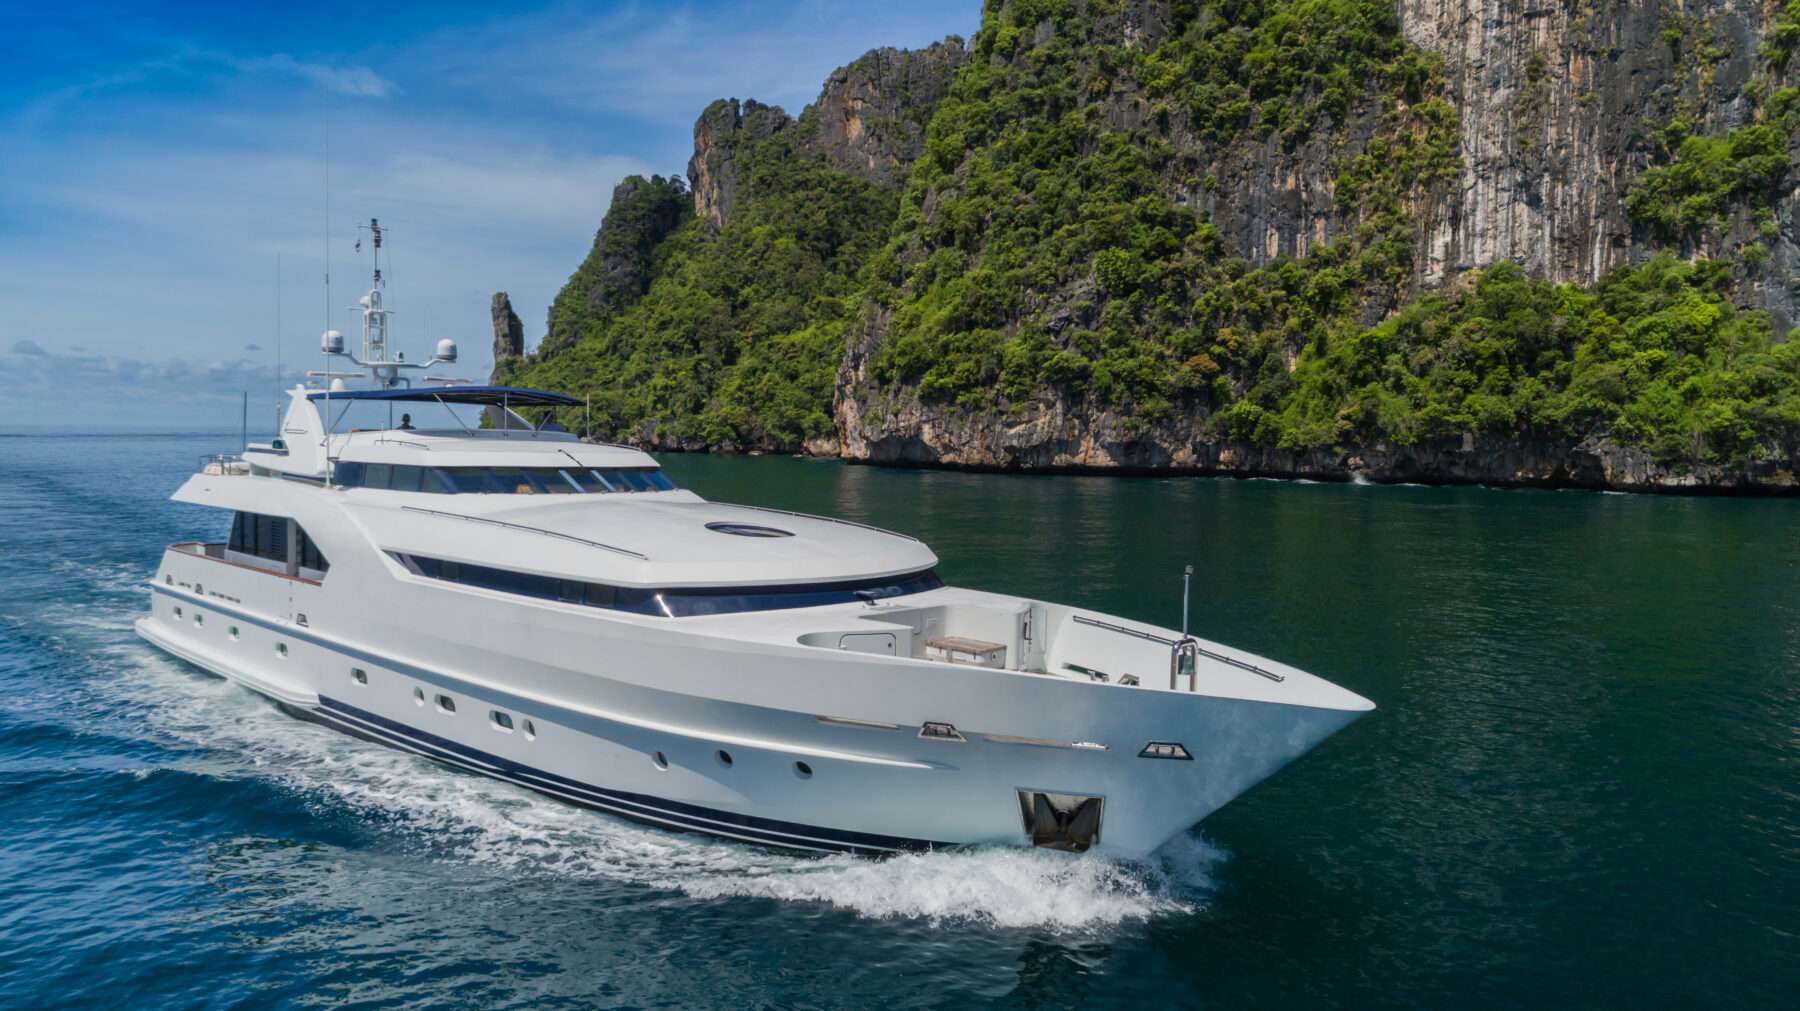 Xanadu - Yacht Charter Philippines & Boat hire in SE Asia 1